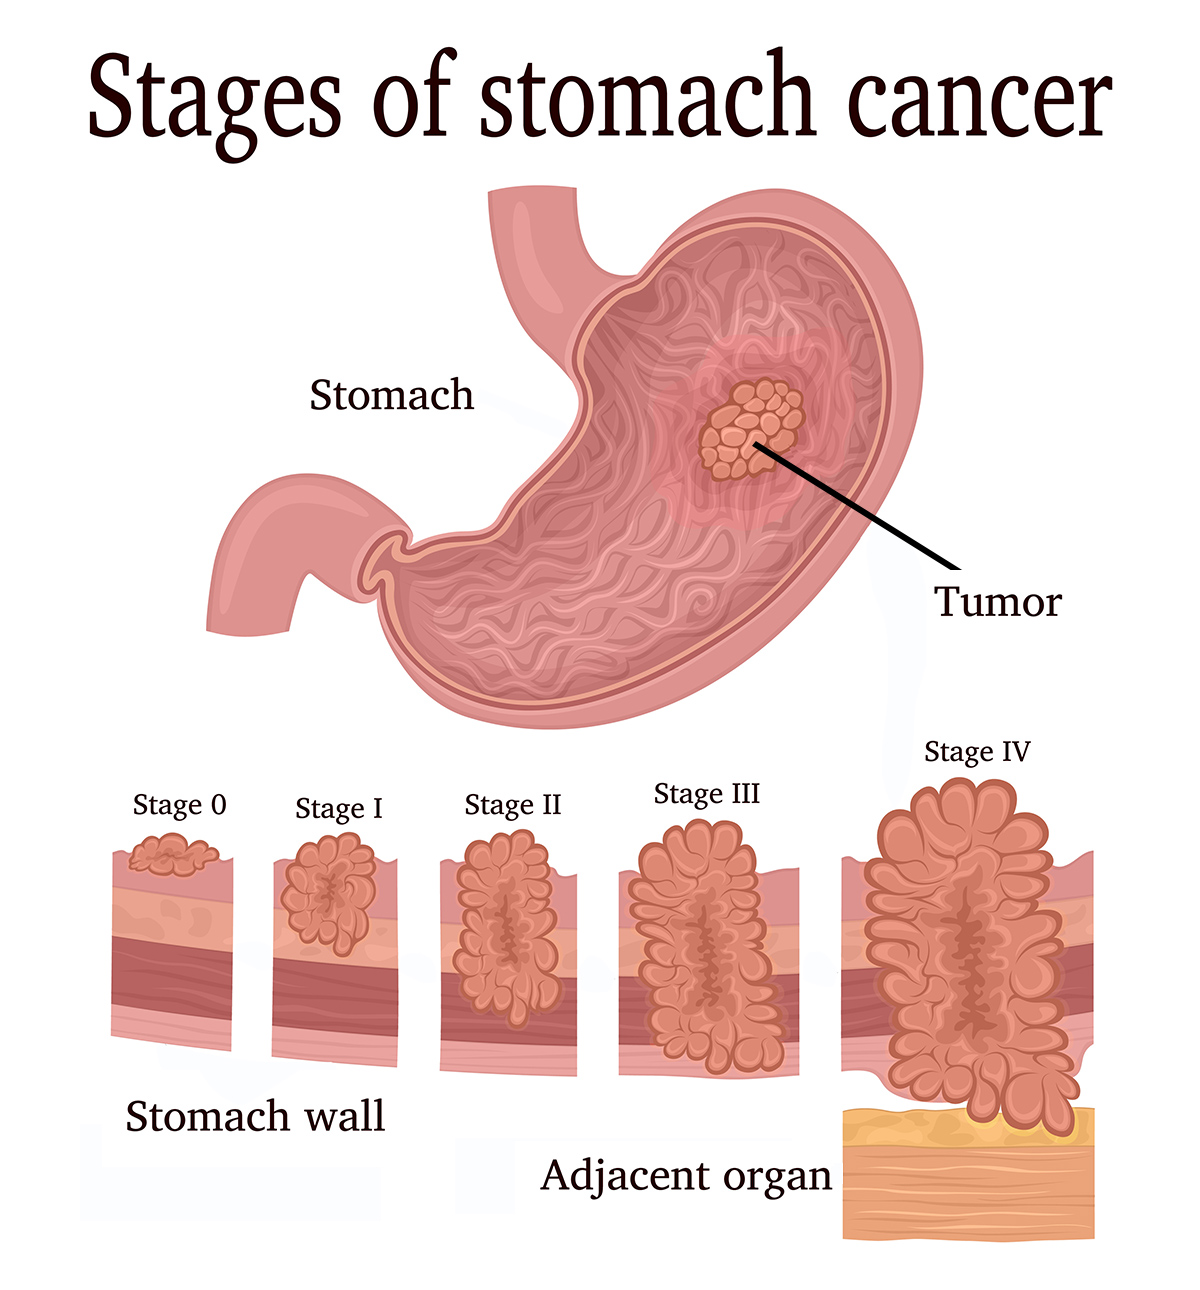 A diagram of the stages of stomach cancer